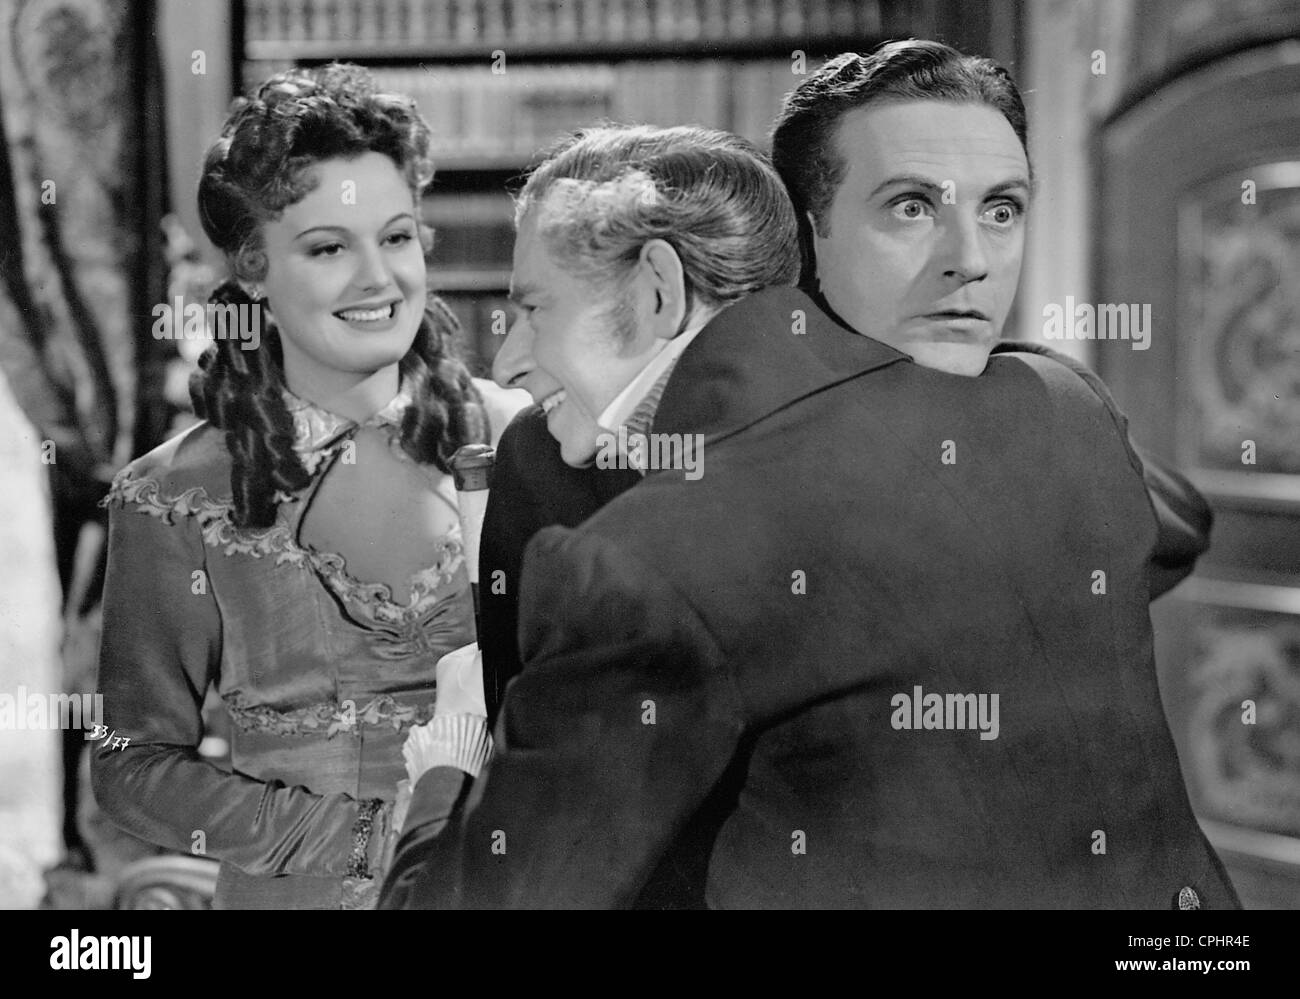 Maria Holst, Paul Henckels et Willy Fritsch dans "sang Viennois", 1942 Banque D'Images